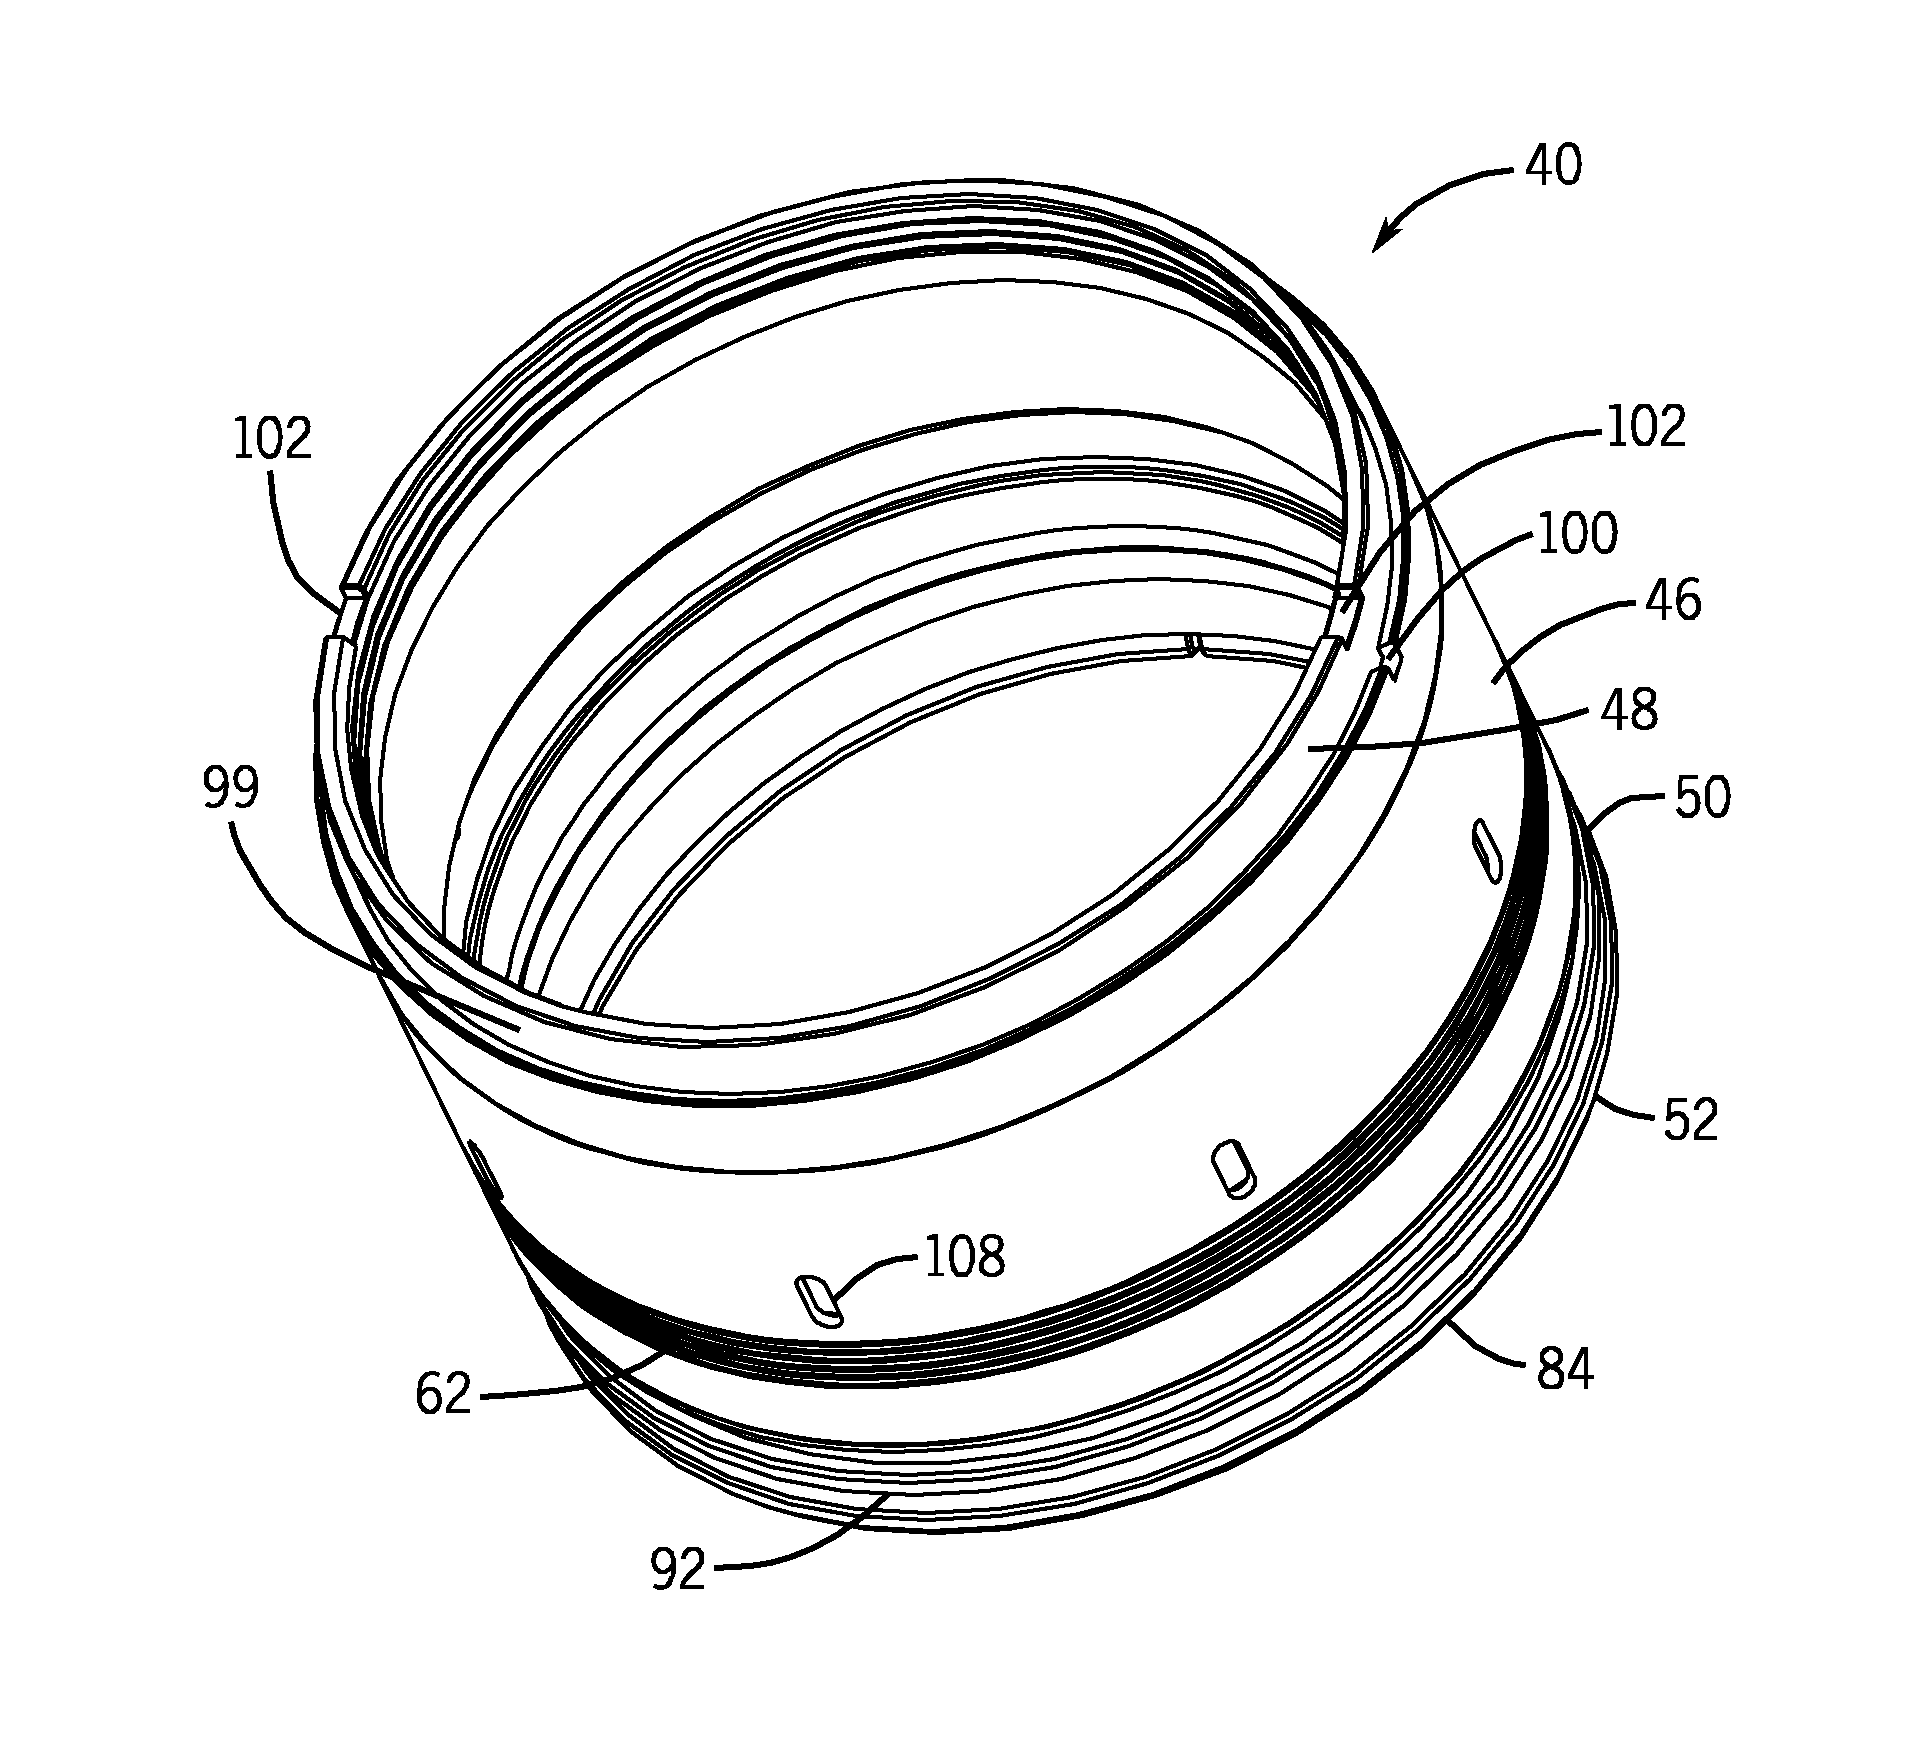 Wellhead assembly having seal assembly with axial restraint